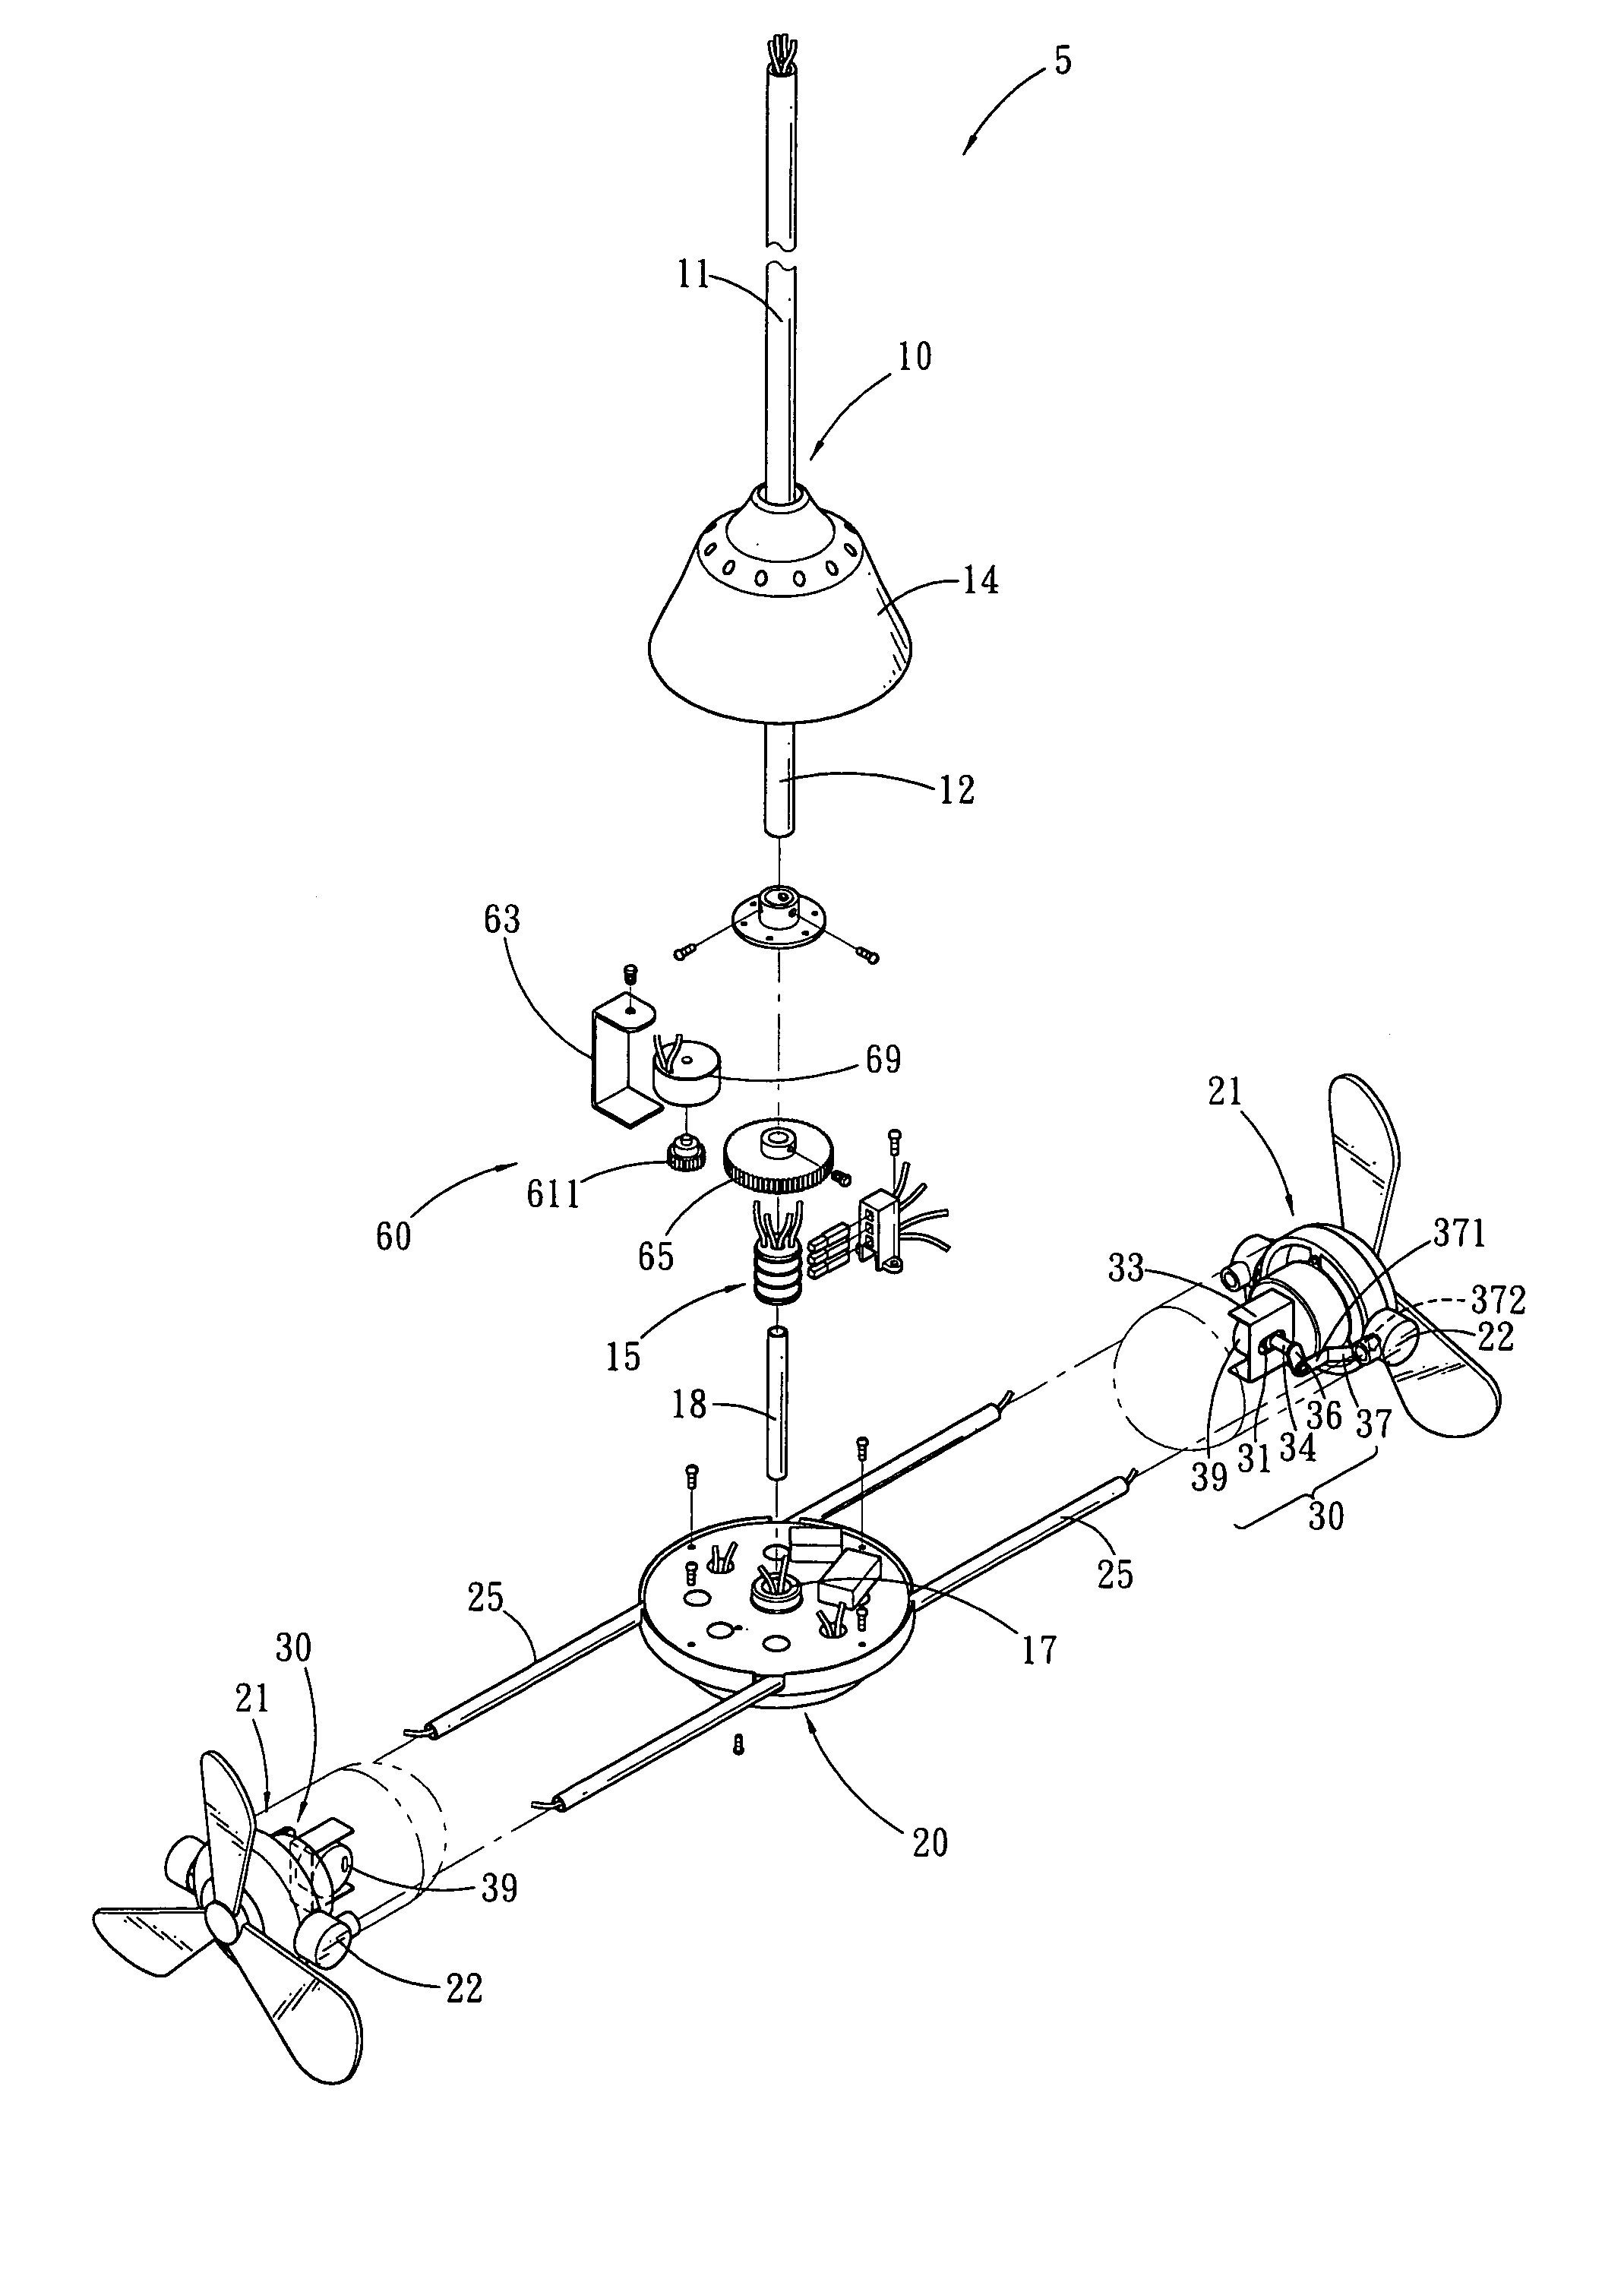 Multi-fan assembly comprising a servomotor driven vertical oscillation means for each fan